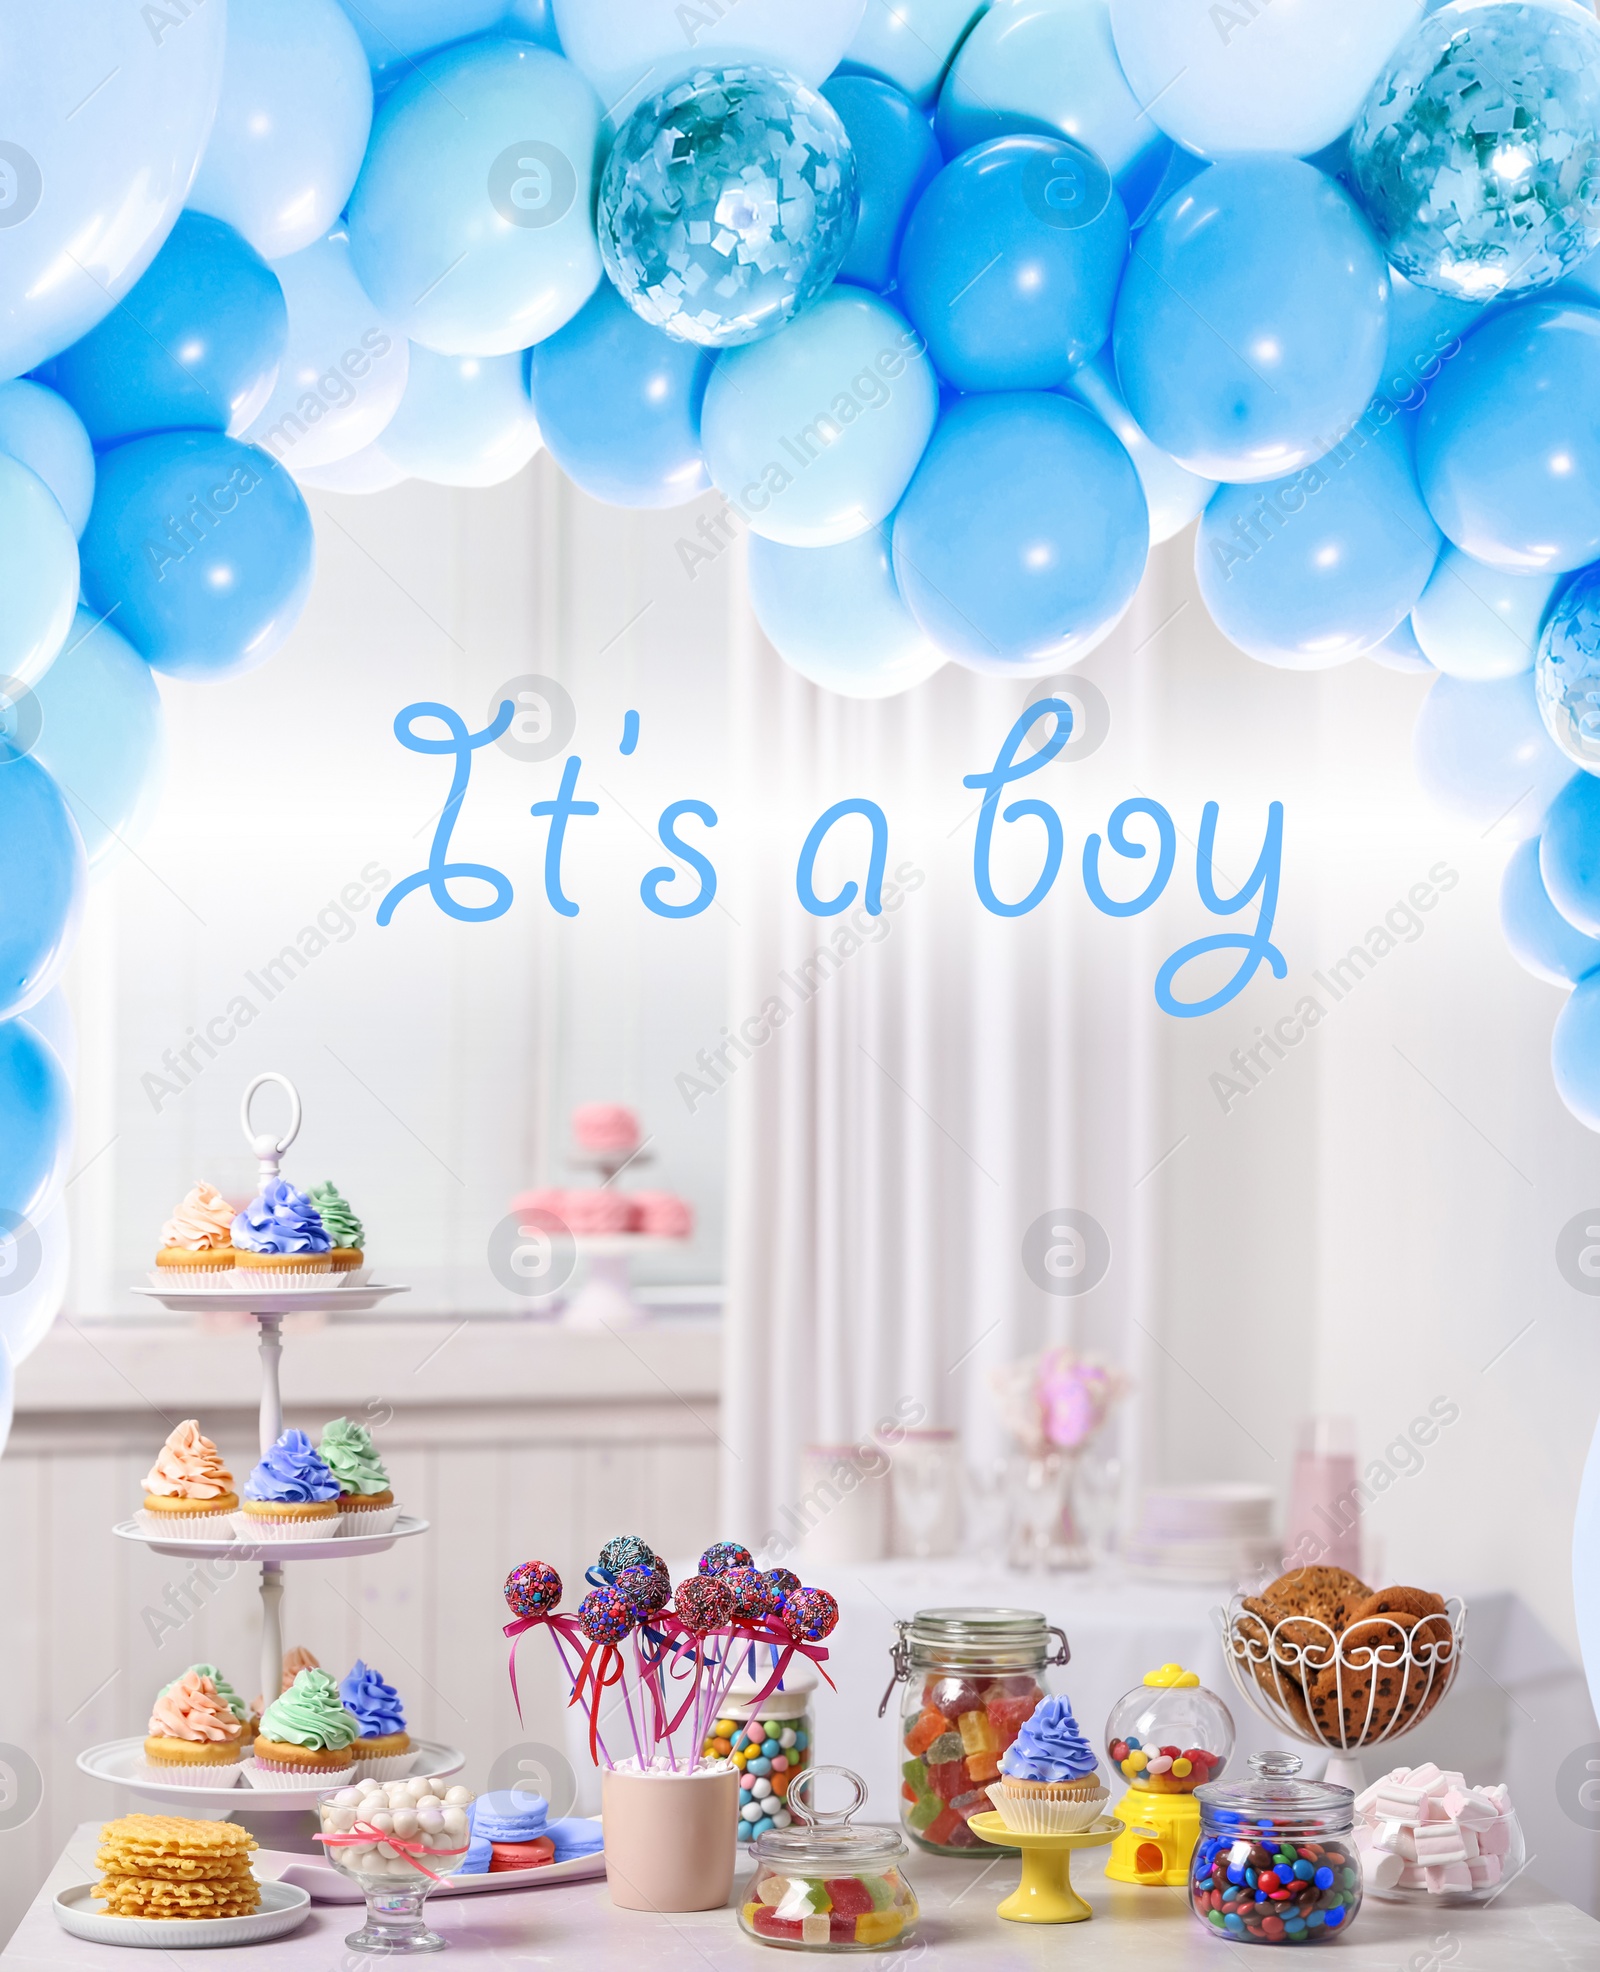 Image of Baby shower party for boy. Tasty treats on table in room decorated with balloons 